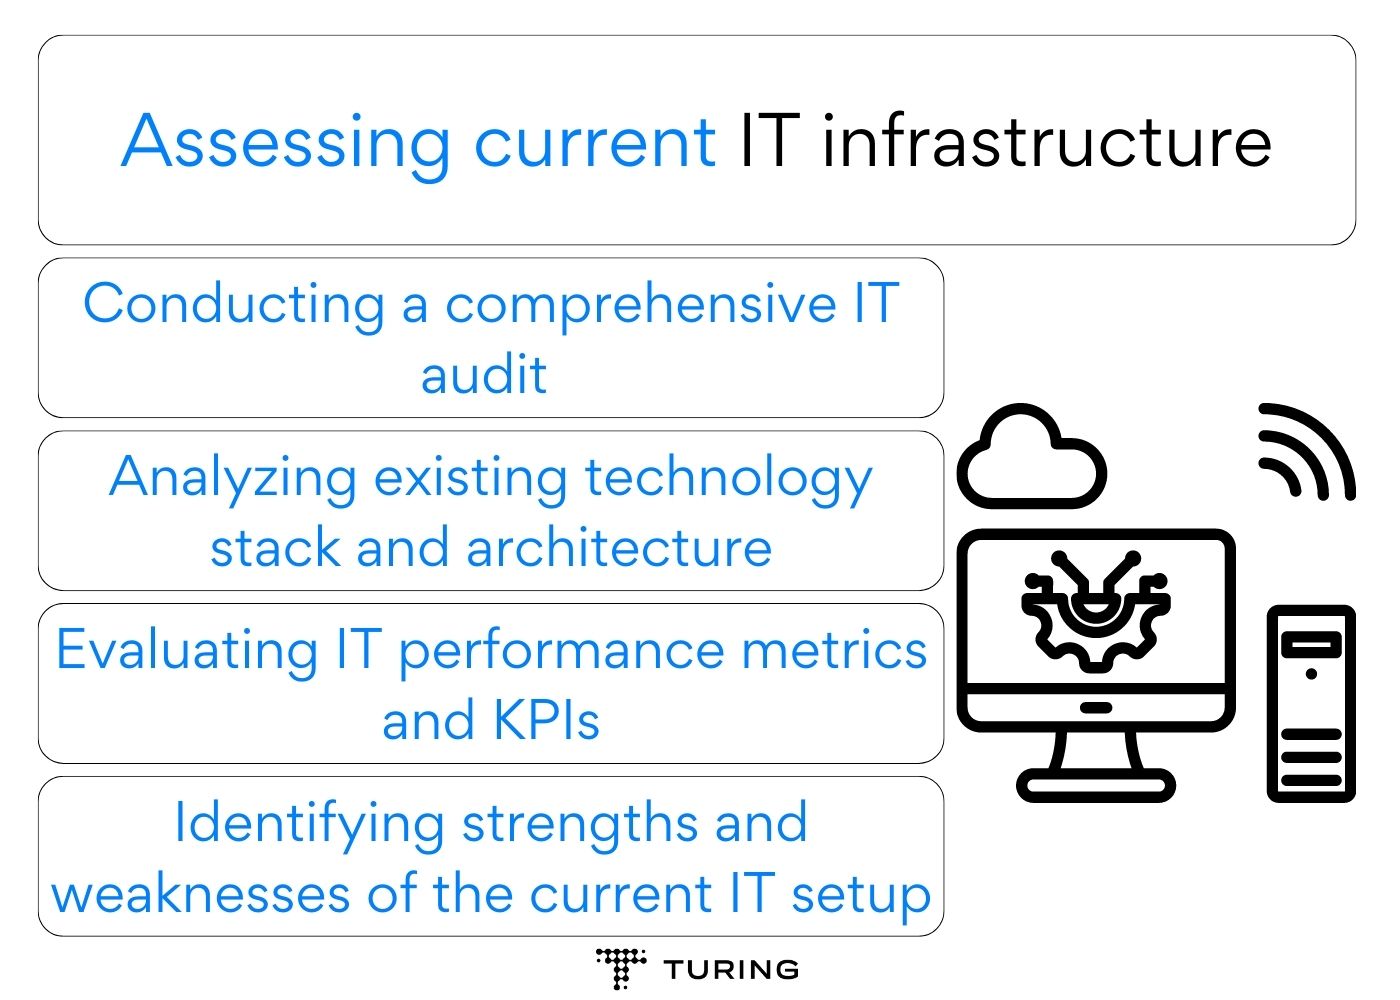 IT transformation strategy: Assessing current IT infrastructure